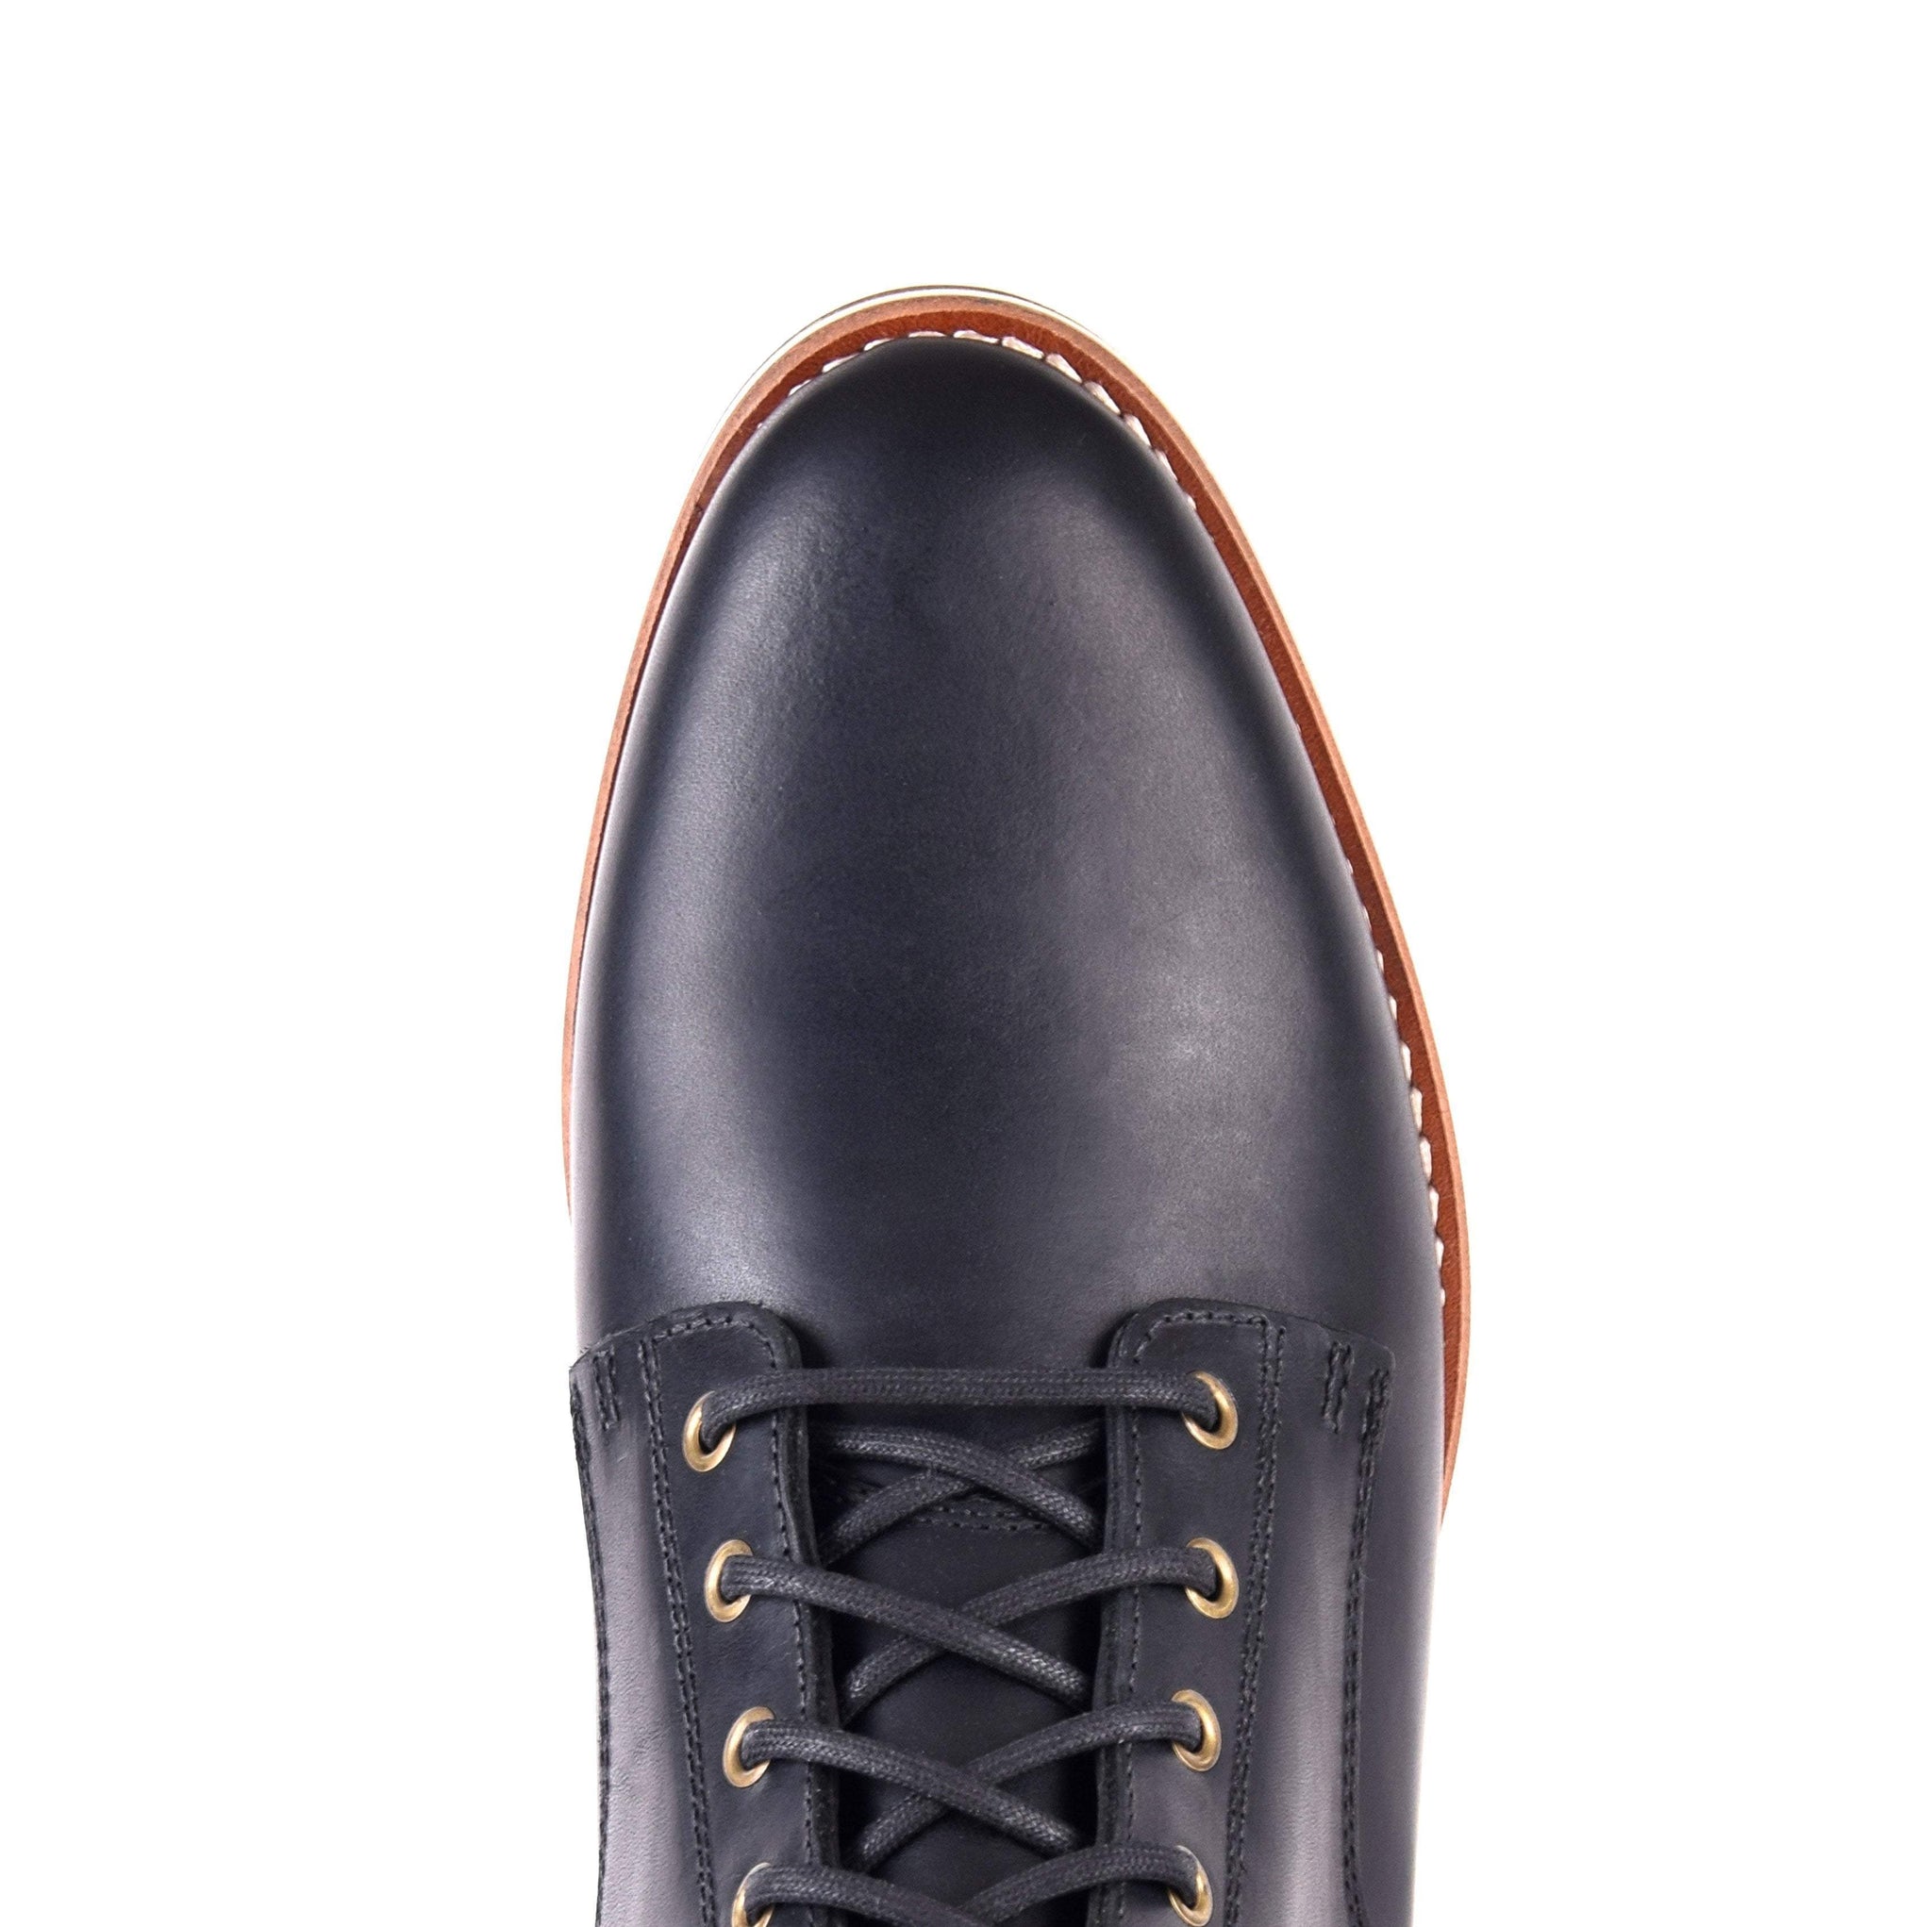 The Zind Black by HELM Boots